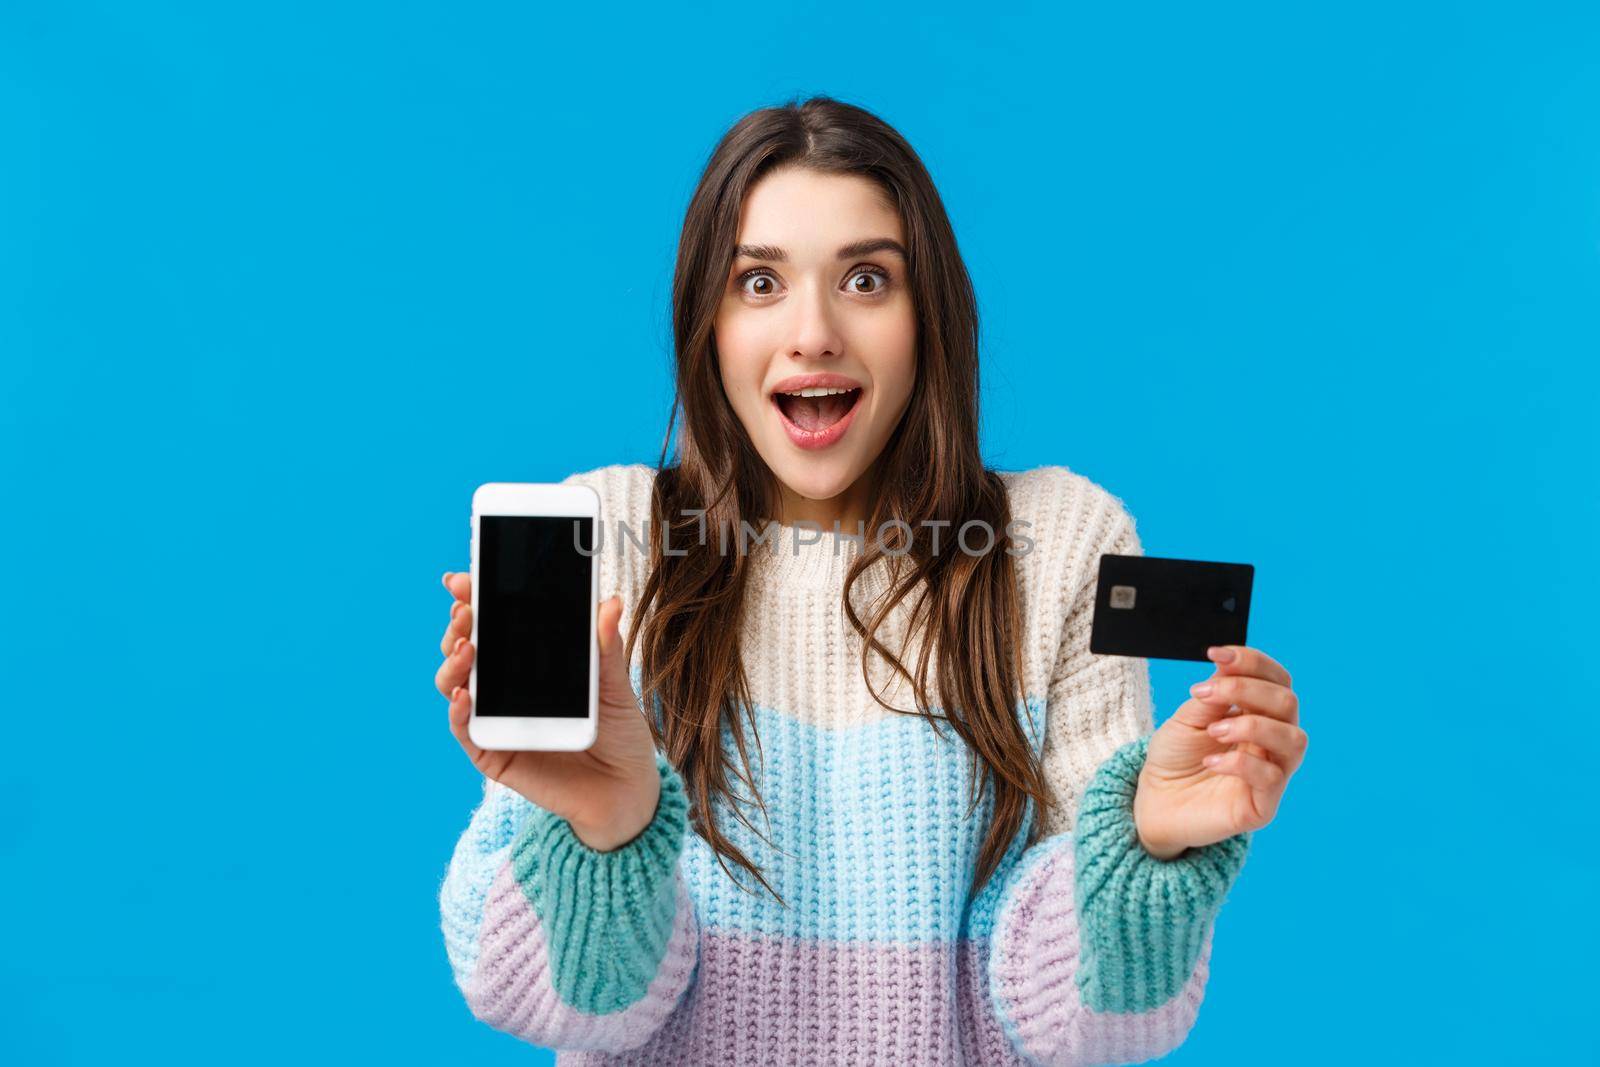 Smiling, excited and fascinated young woman talking about cool new app, banking application, deposit or cashback service, holding smartphone facing display camera, credit card, grinning amused by Benzoix